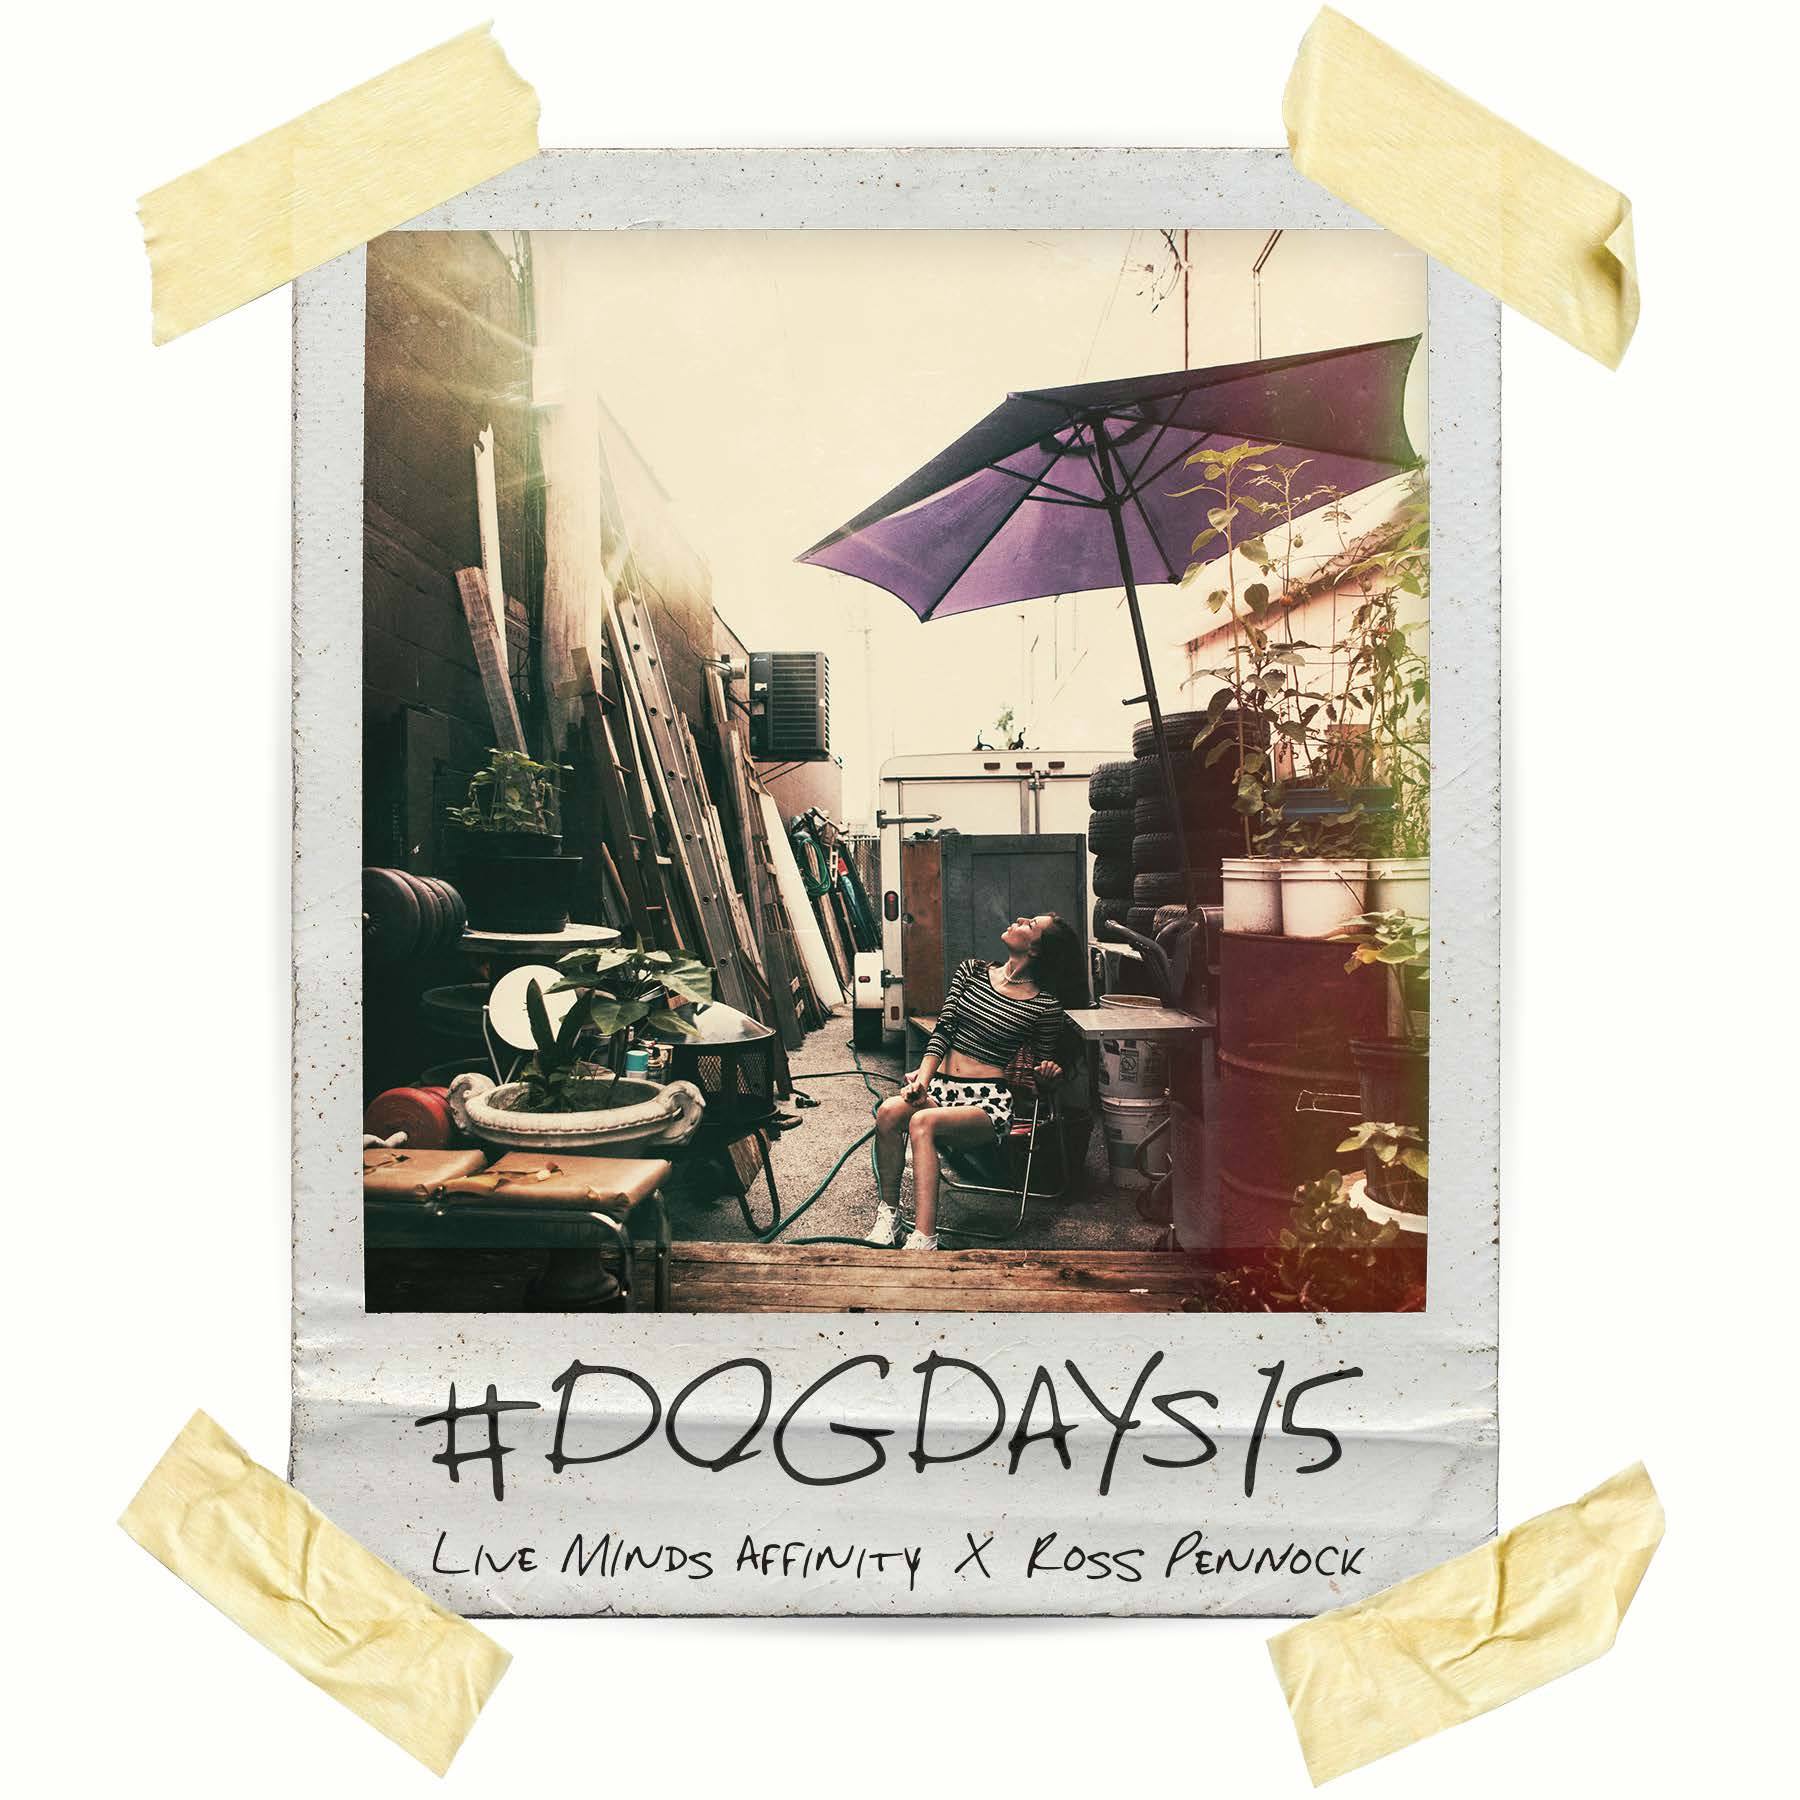 Live Minds Affinity Drops #DOGDAYS15, an Ode to a Carefree Summer